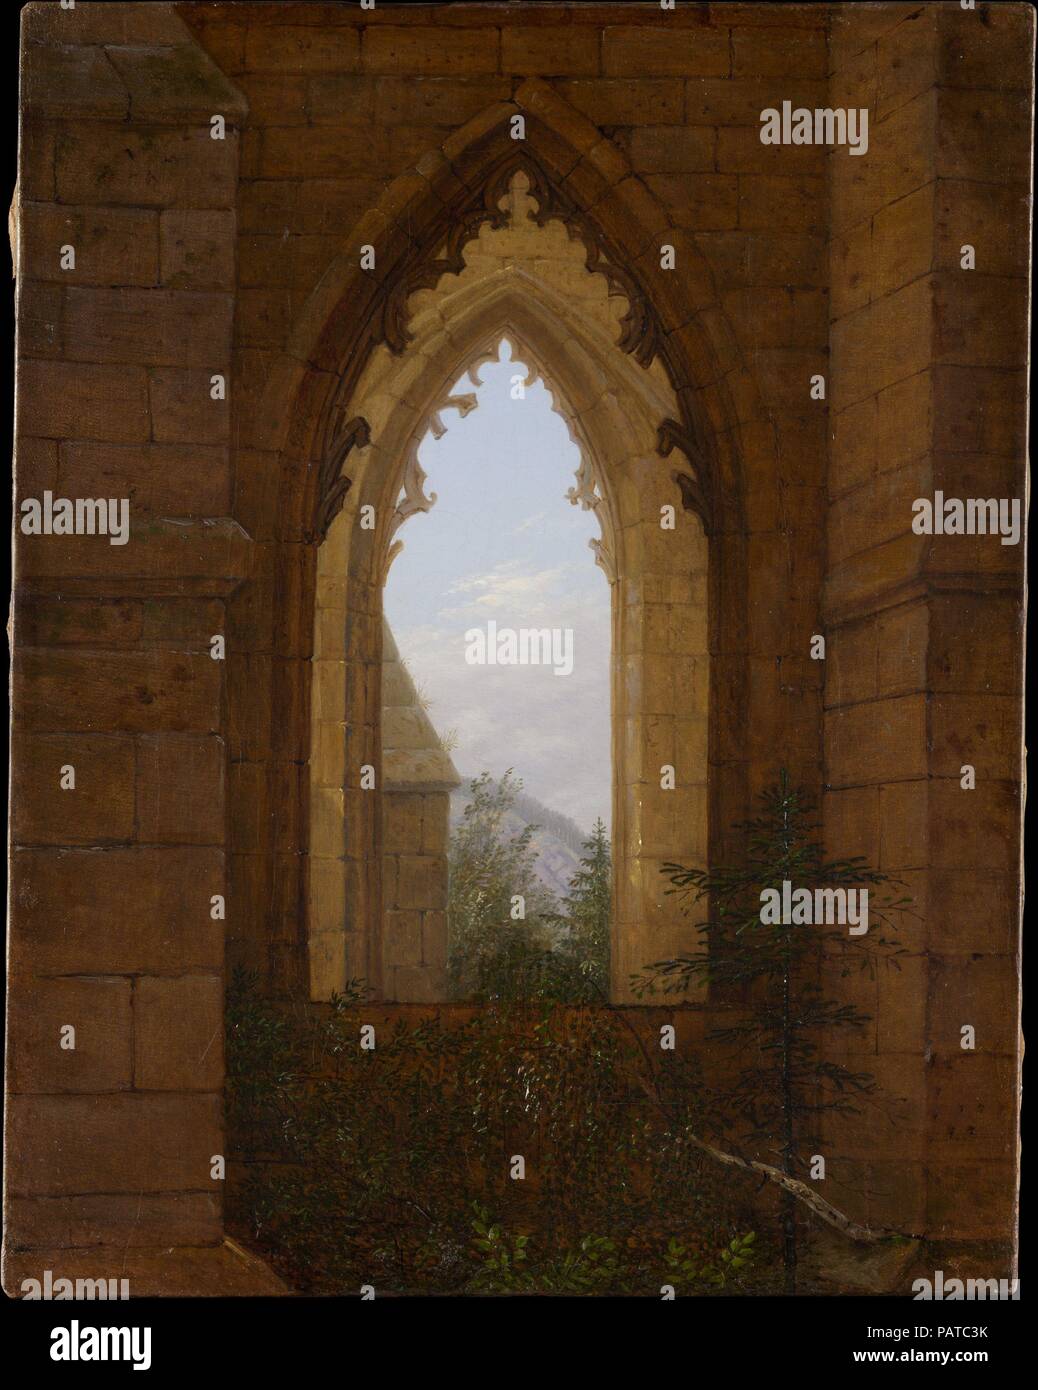 Gothic Windows in the Ruins of the Monastery at Oybin. Artist: Carl Gustav Carus (German, Leipzig 1789-1869 Dresden). Dimensions: 17 x 13 1/4 in. (43.2 x 33.7 cm)  Frame: 21 3/4 x 17 7/8 x 2 1/4 in. (55.2 x 45.4 x 5.7 cm). Date: ca. 1828.  This church, with its fine Gothic tracery, was founded in 1369, deserted in 1546, and later embraced as a motif by German Romantic artists. Carus visited in August 1820, making a drawing (Staatliche Kunstsammlungen Dresden) that served as a study for the painting. It depicts a vista through two windows--one on either side of the ruined choir--toward a pale m Stock Photo